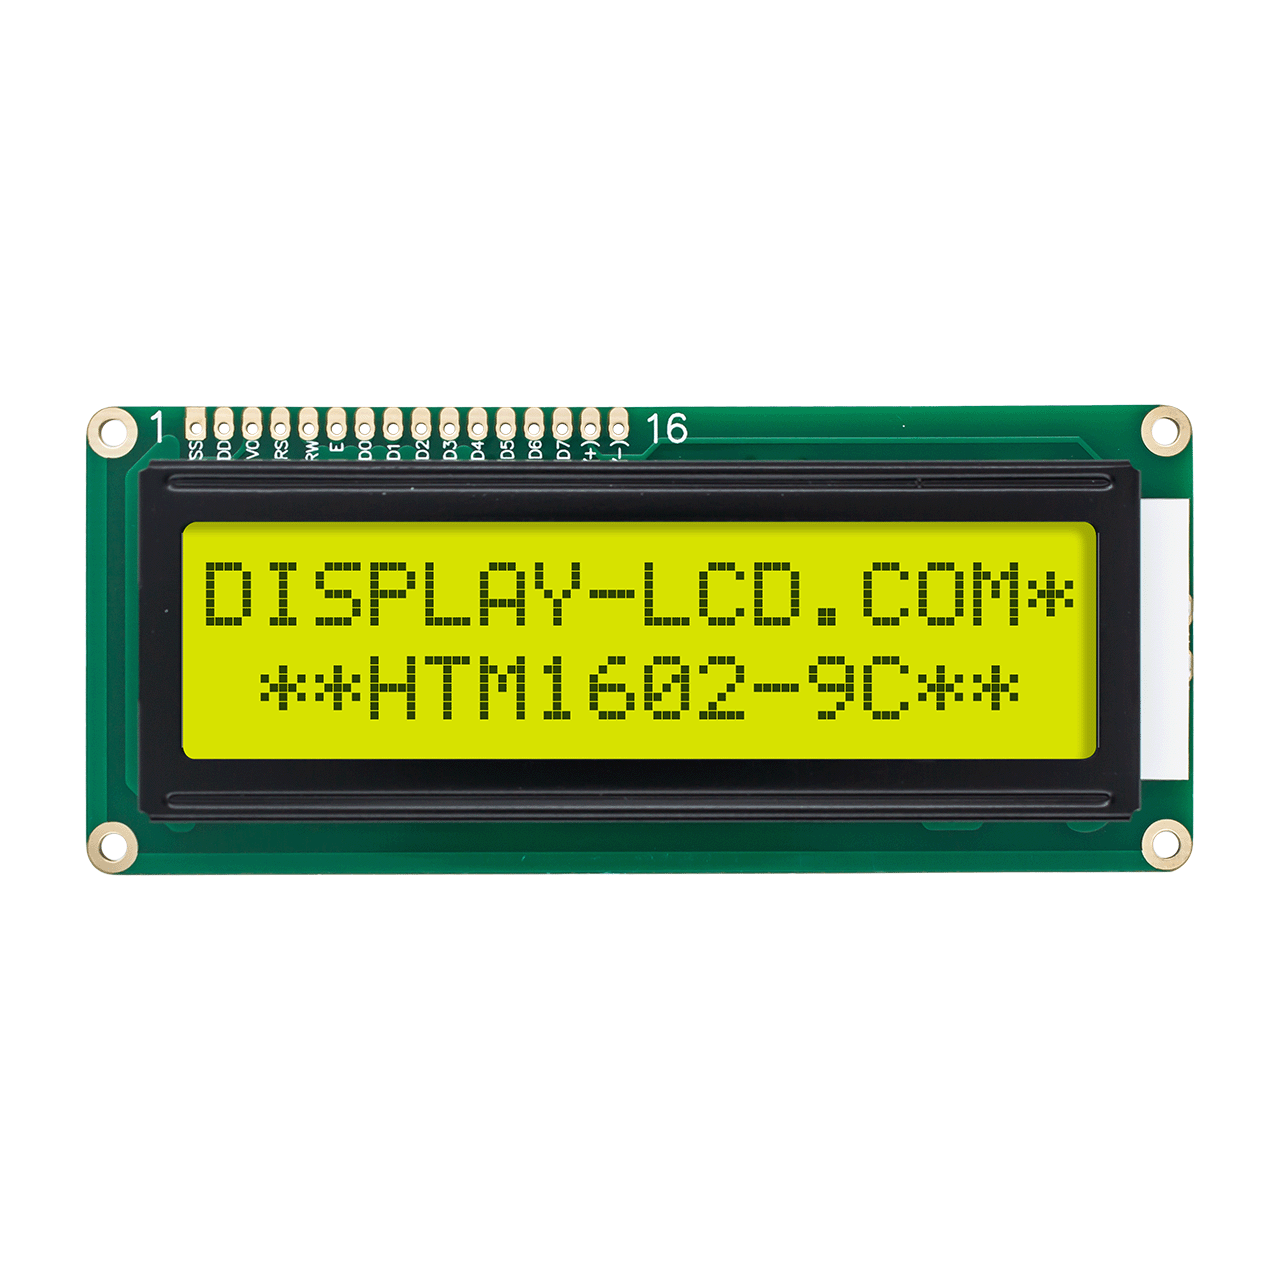 2X16 Character LCD Module Display | STN+ Yellow/Green with Side Yellow/Green Backlight-Arduino